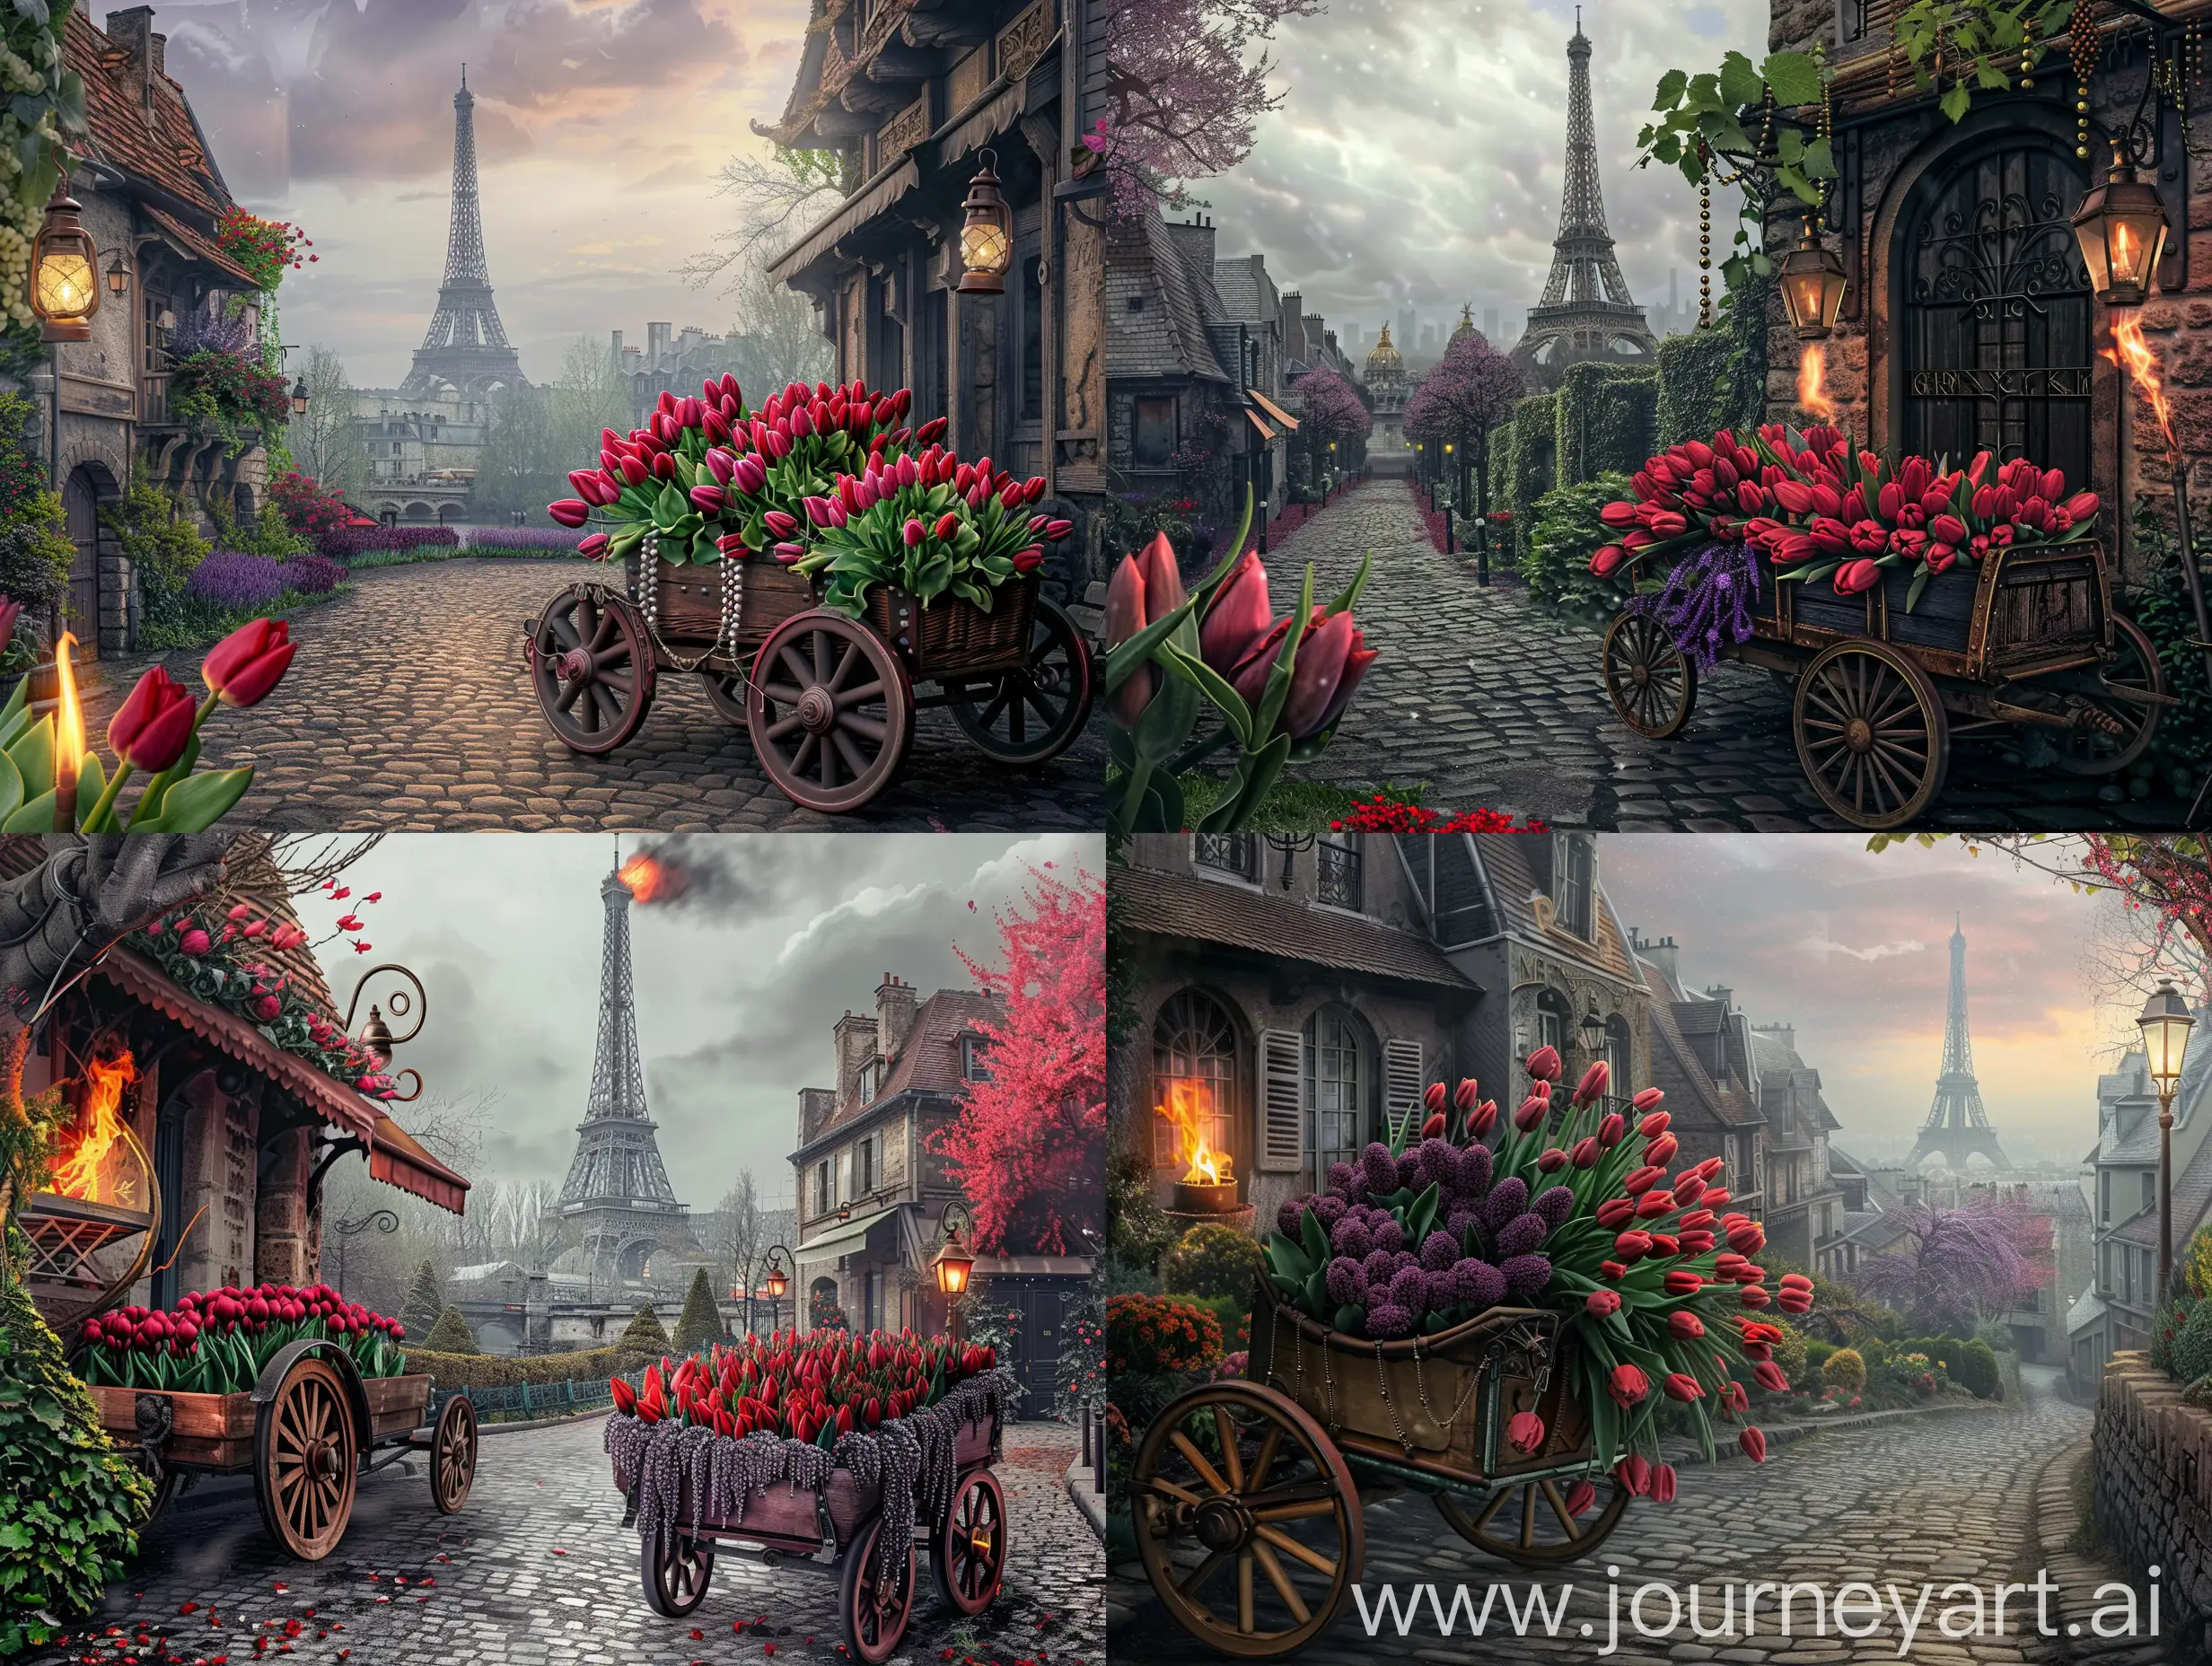 Surreal-Parisian-Spring-Antique-Steampunk-Cart-with-Tulips-and-Burning-Lanterns